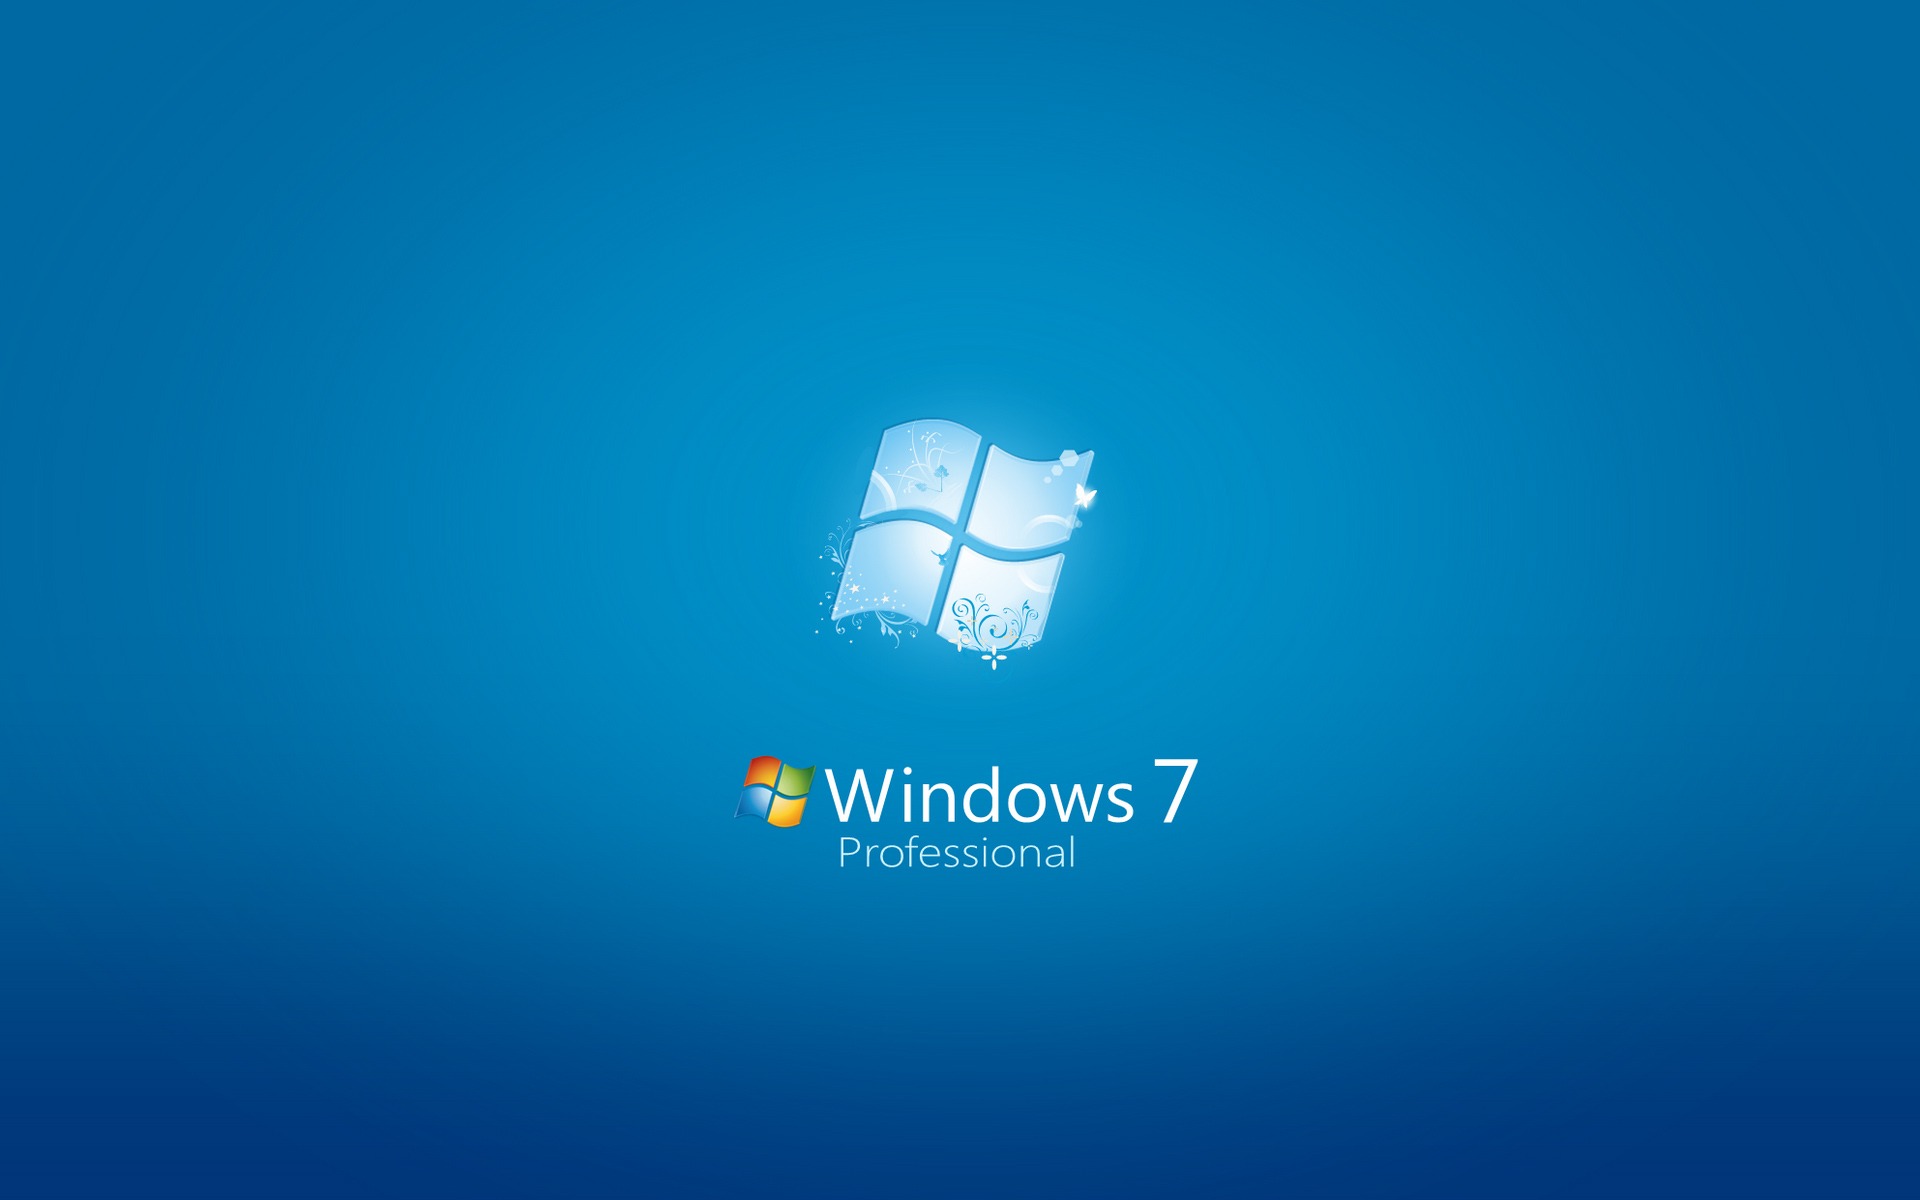 Windows 7 Professional Wallpapers HD Wallpapers